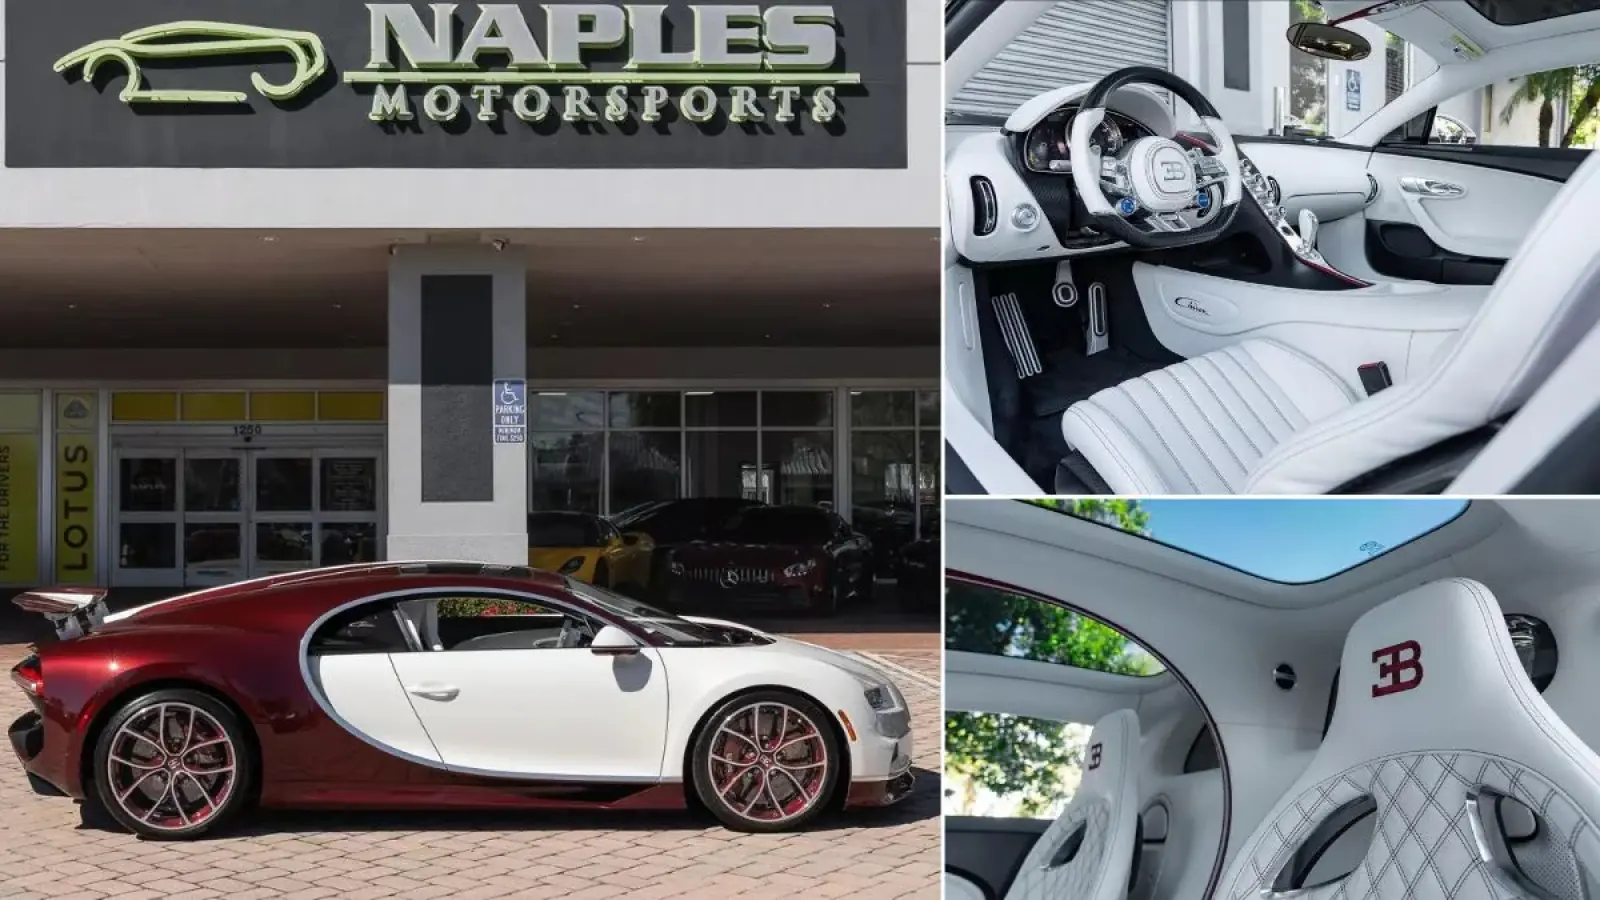 Buy this car and get a free Rolls-Royce Wraith! Know dealership's crazy deals